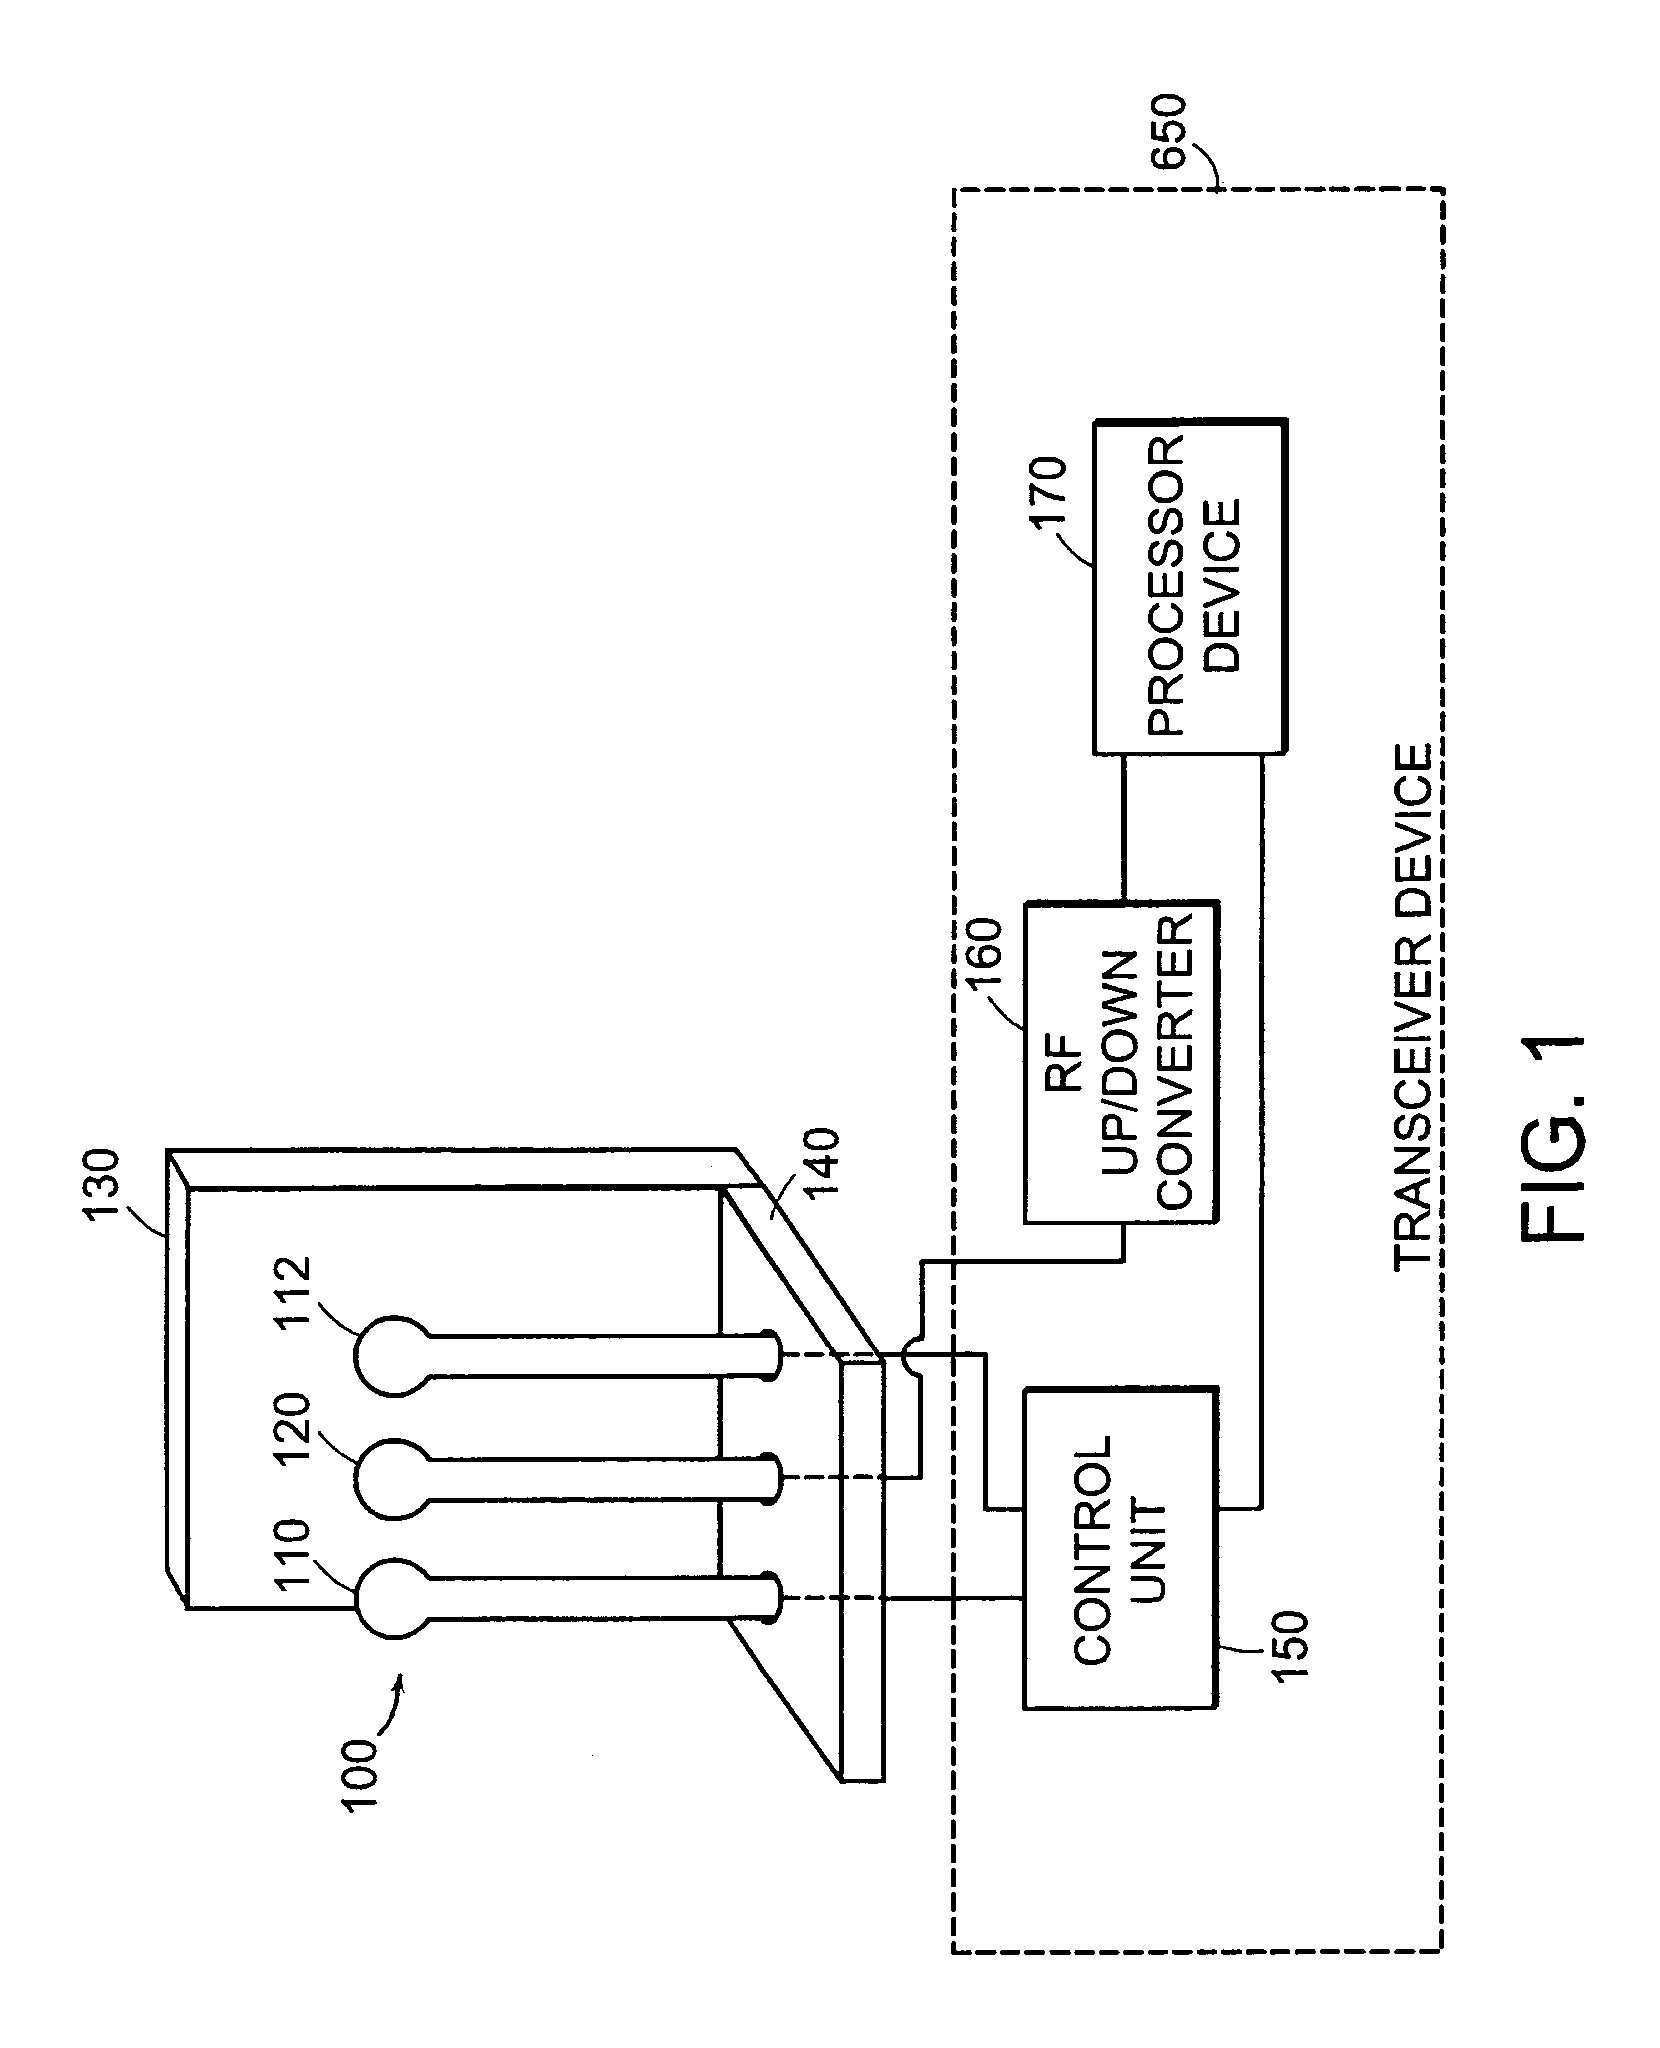 Beamforming using a backplane and passive antenna element